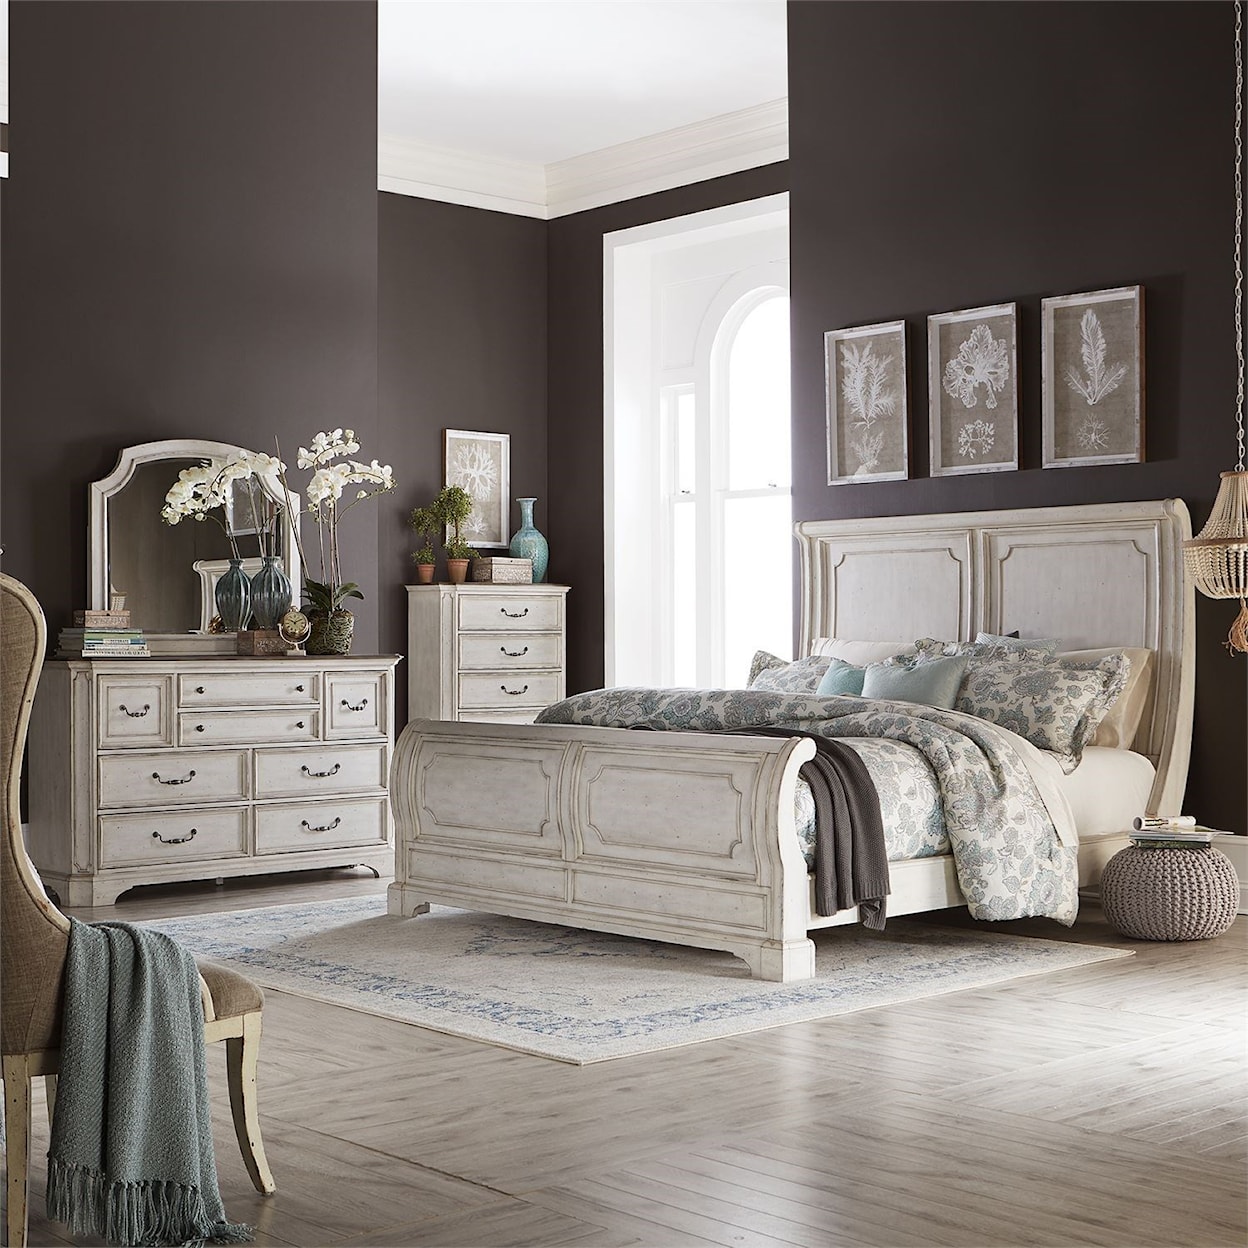 Liberty Furniture Abbey Road California King Bedroom Group